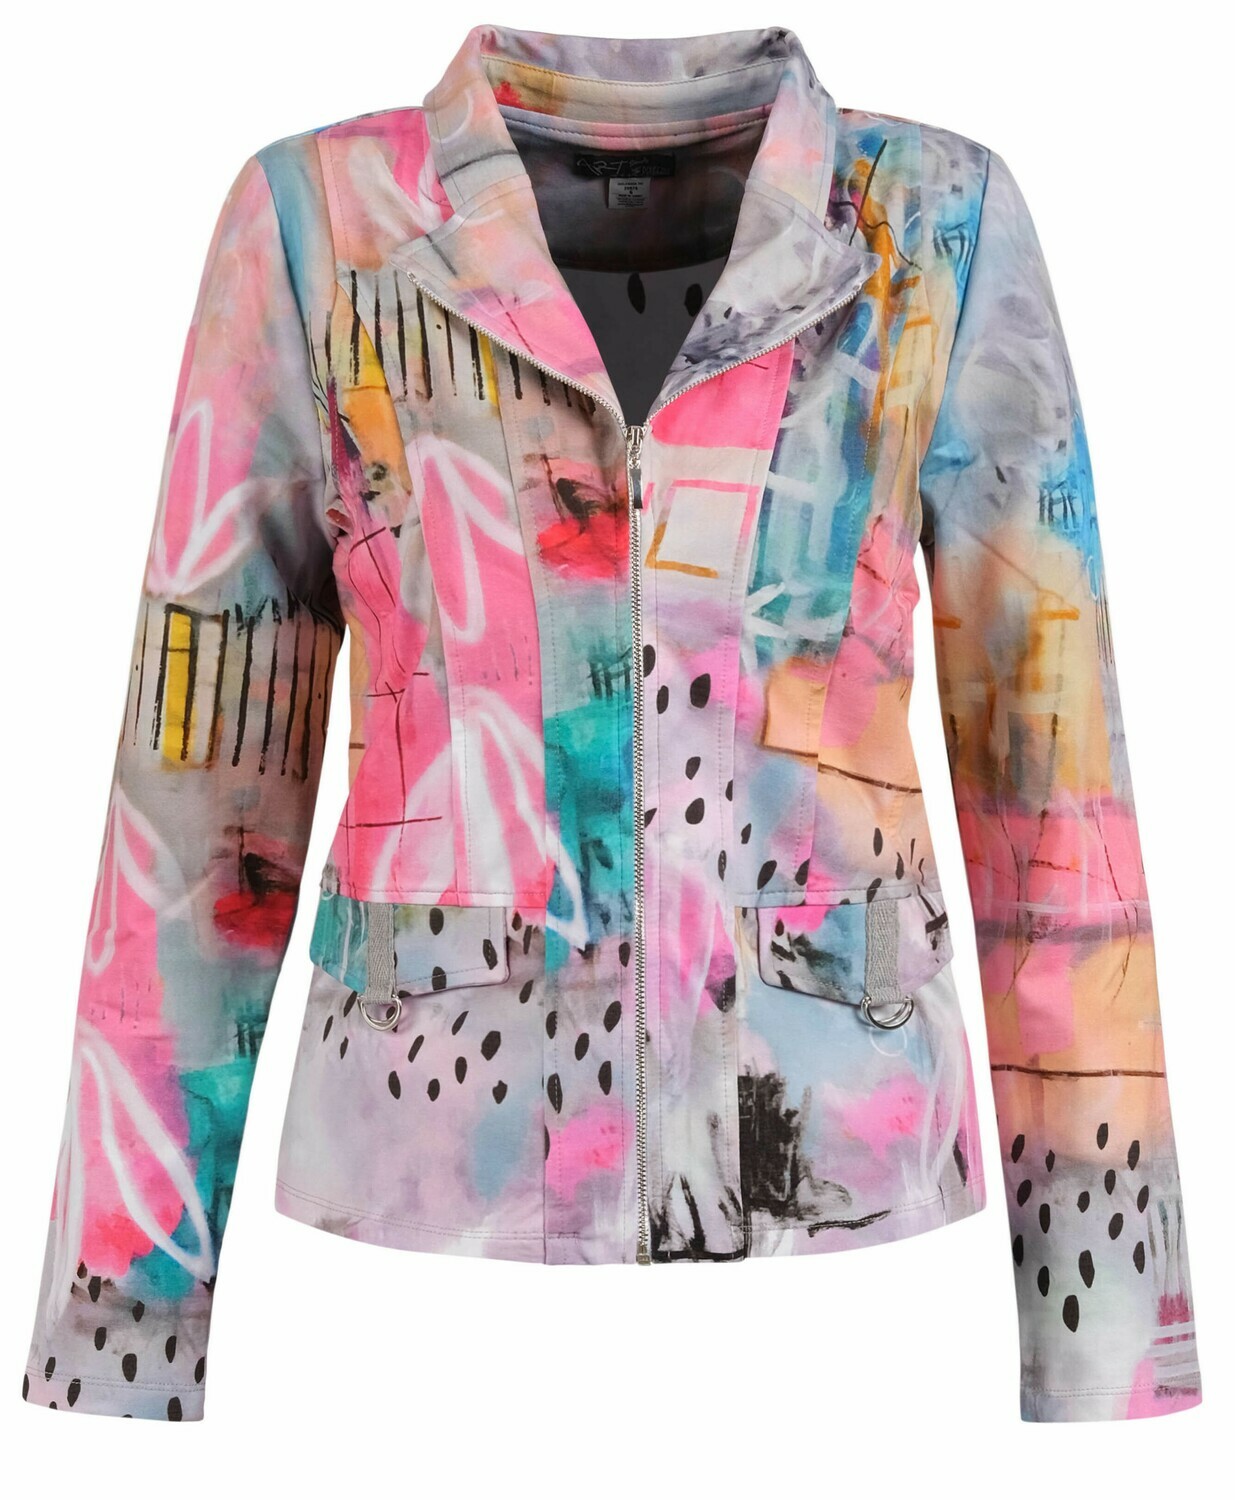 Simply Art Dolcezza: Receive The Best Things In Life Abstract Art Zip Jacket